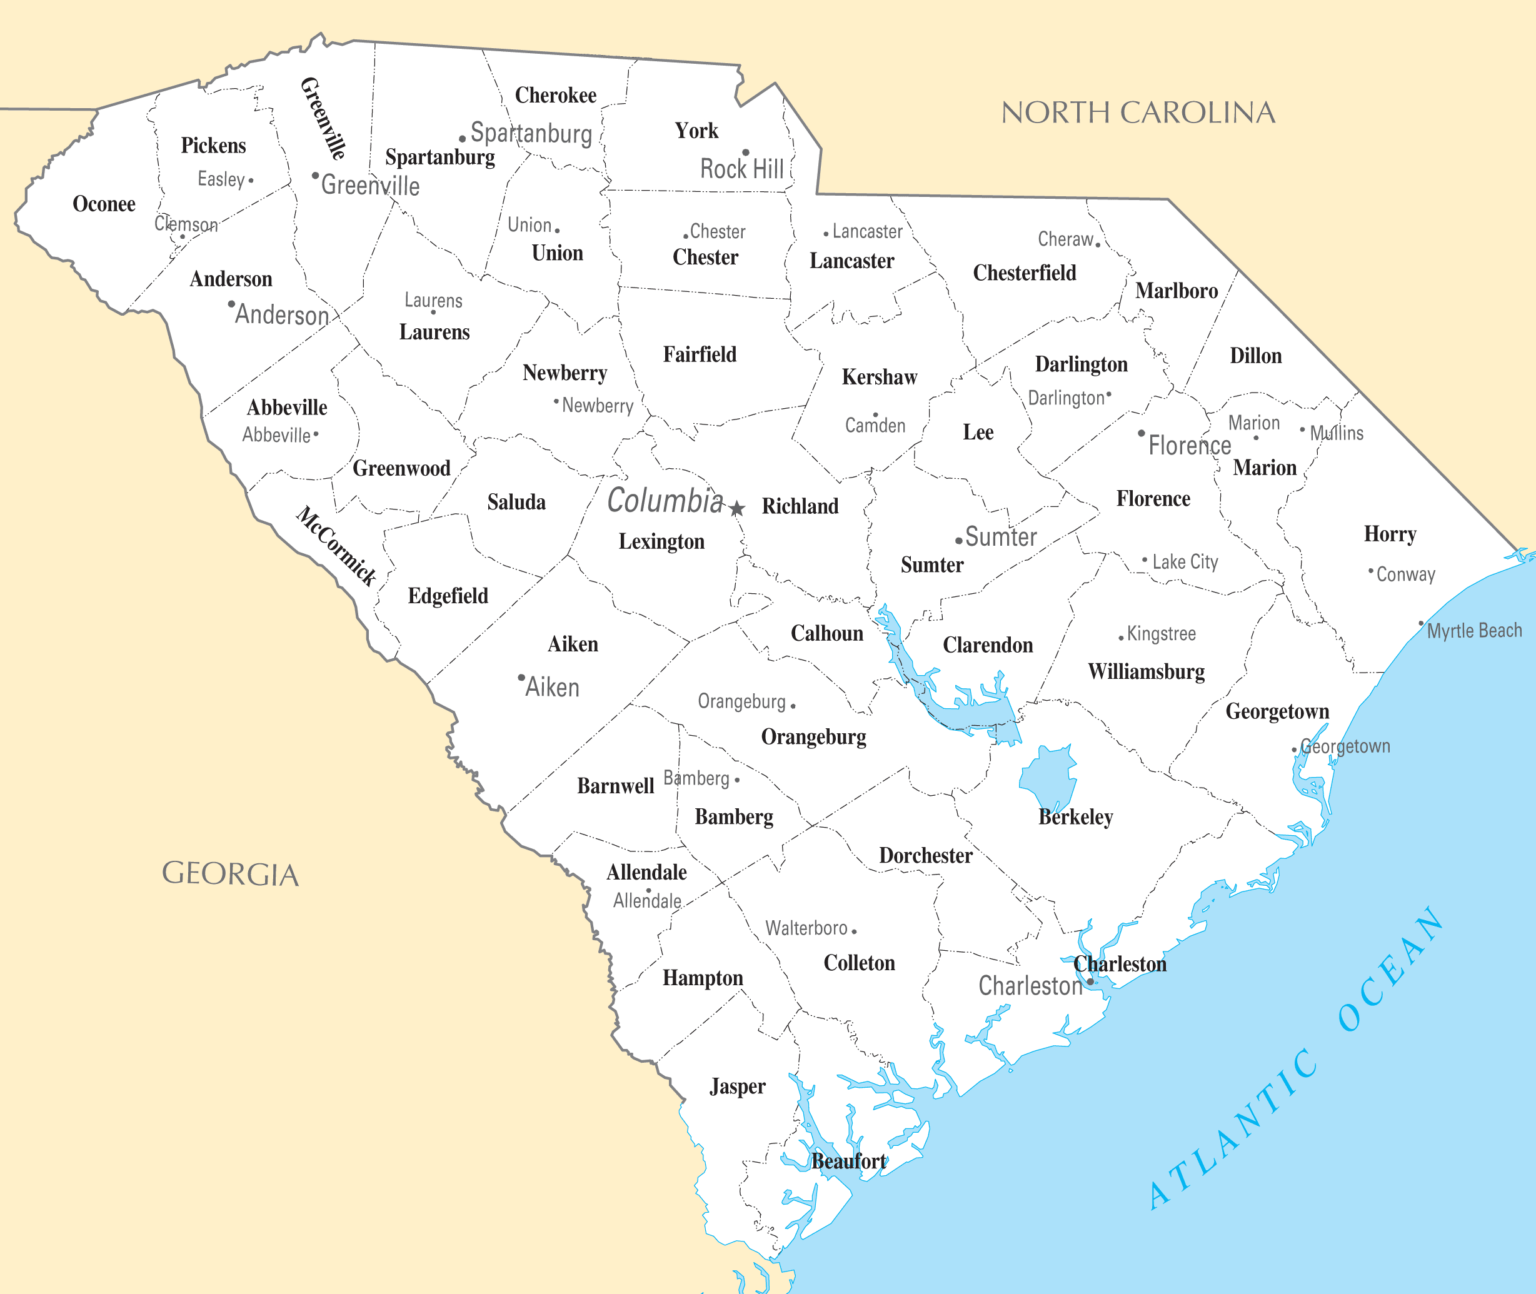 South Carolina Cities And Towns Mapsof Printable Map Of The United States 8843